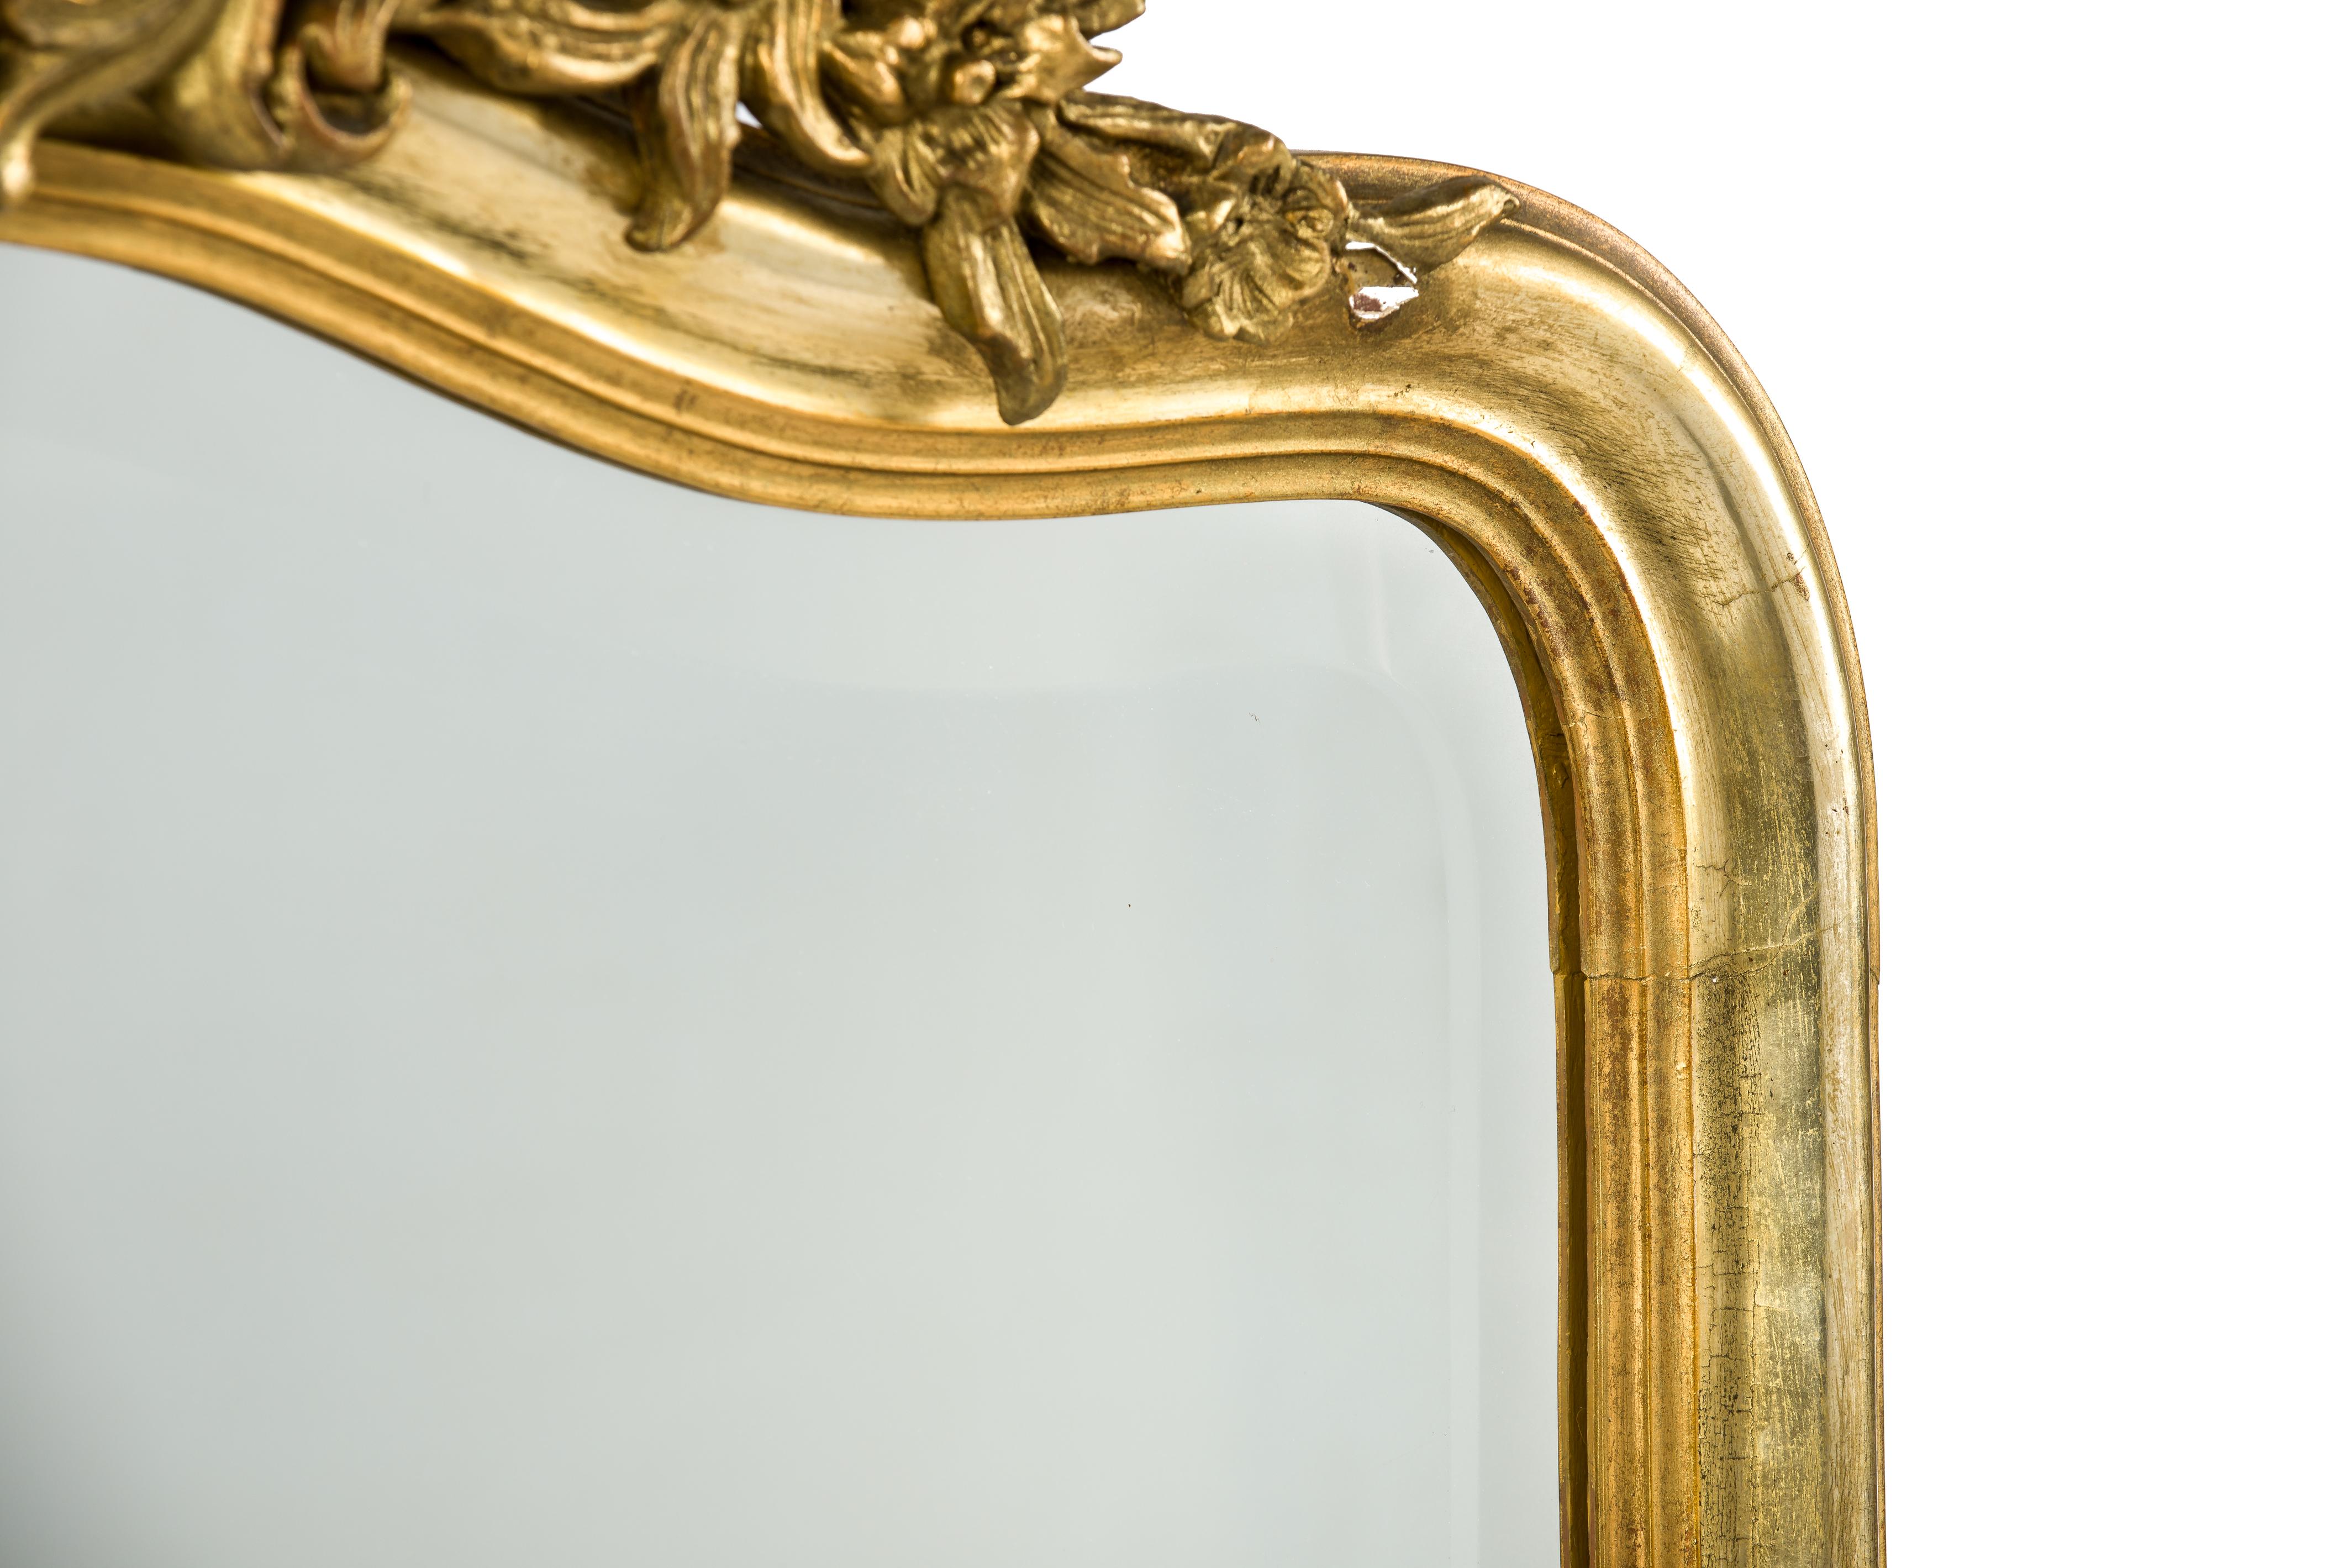 Antique 19th century French Louis Quinze Gold Gilt Mirror with Facetted Glass For Sale 2